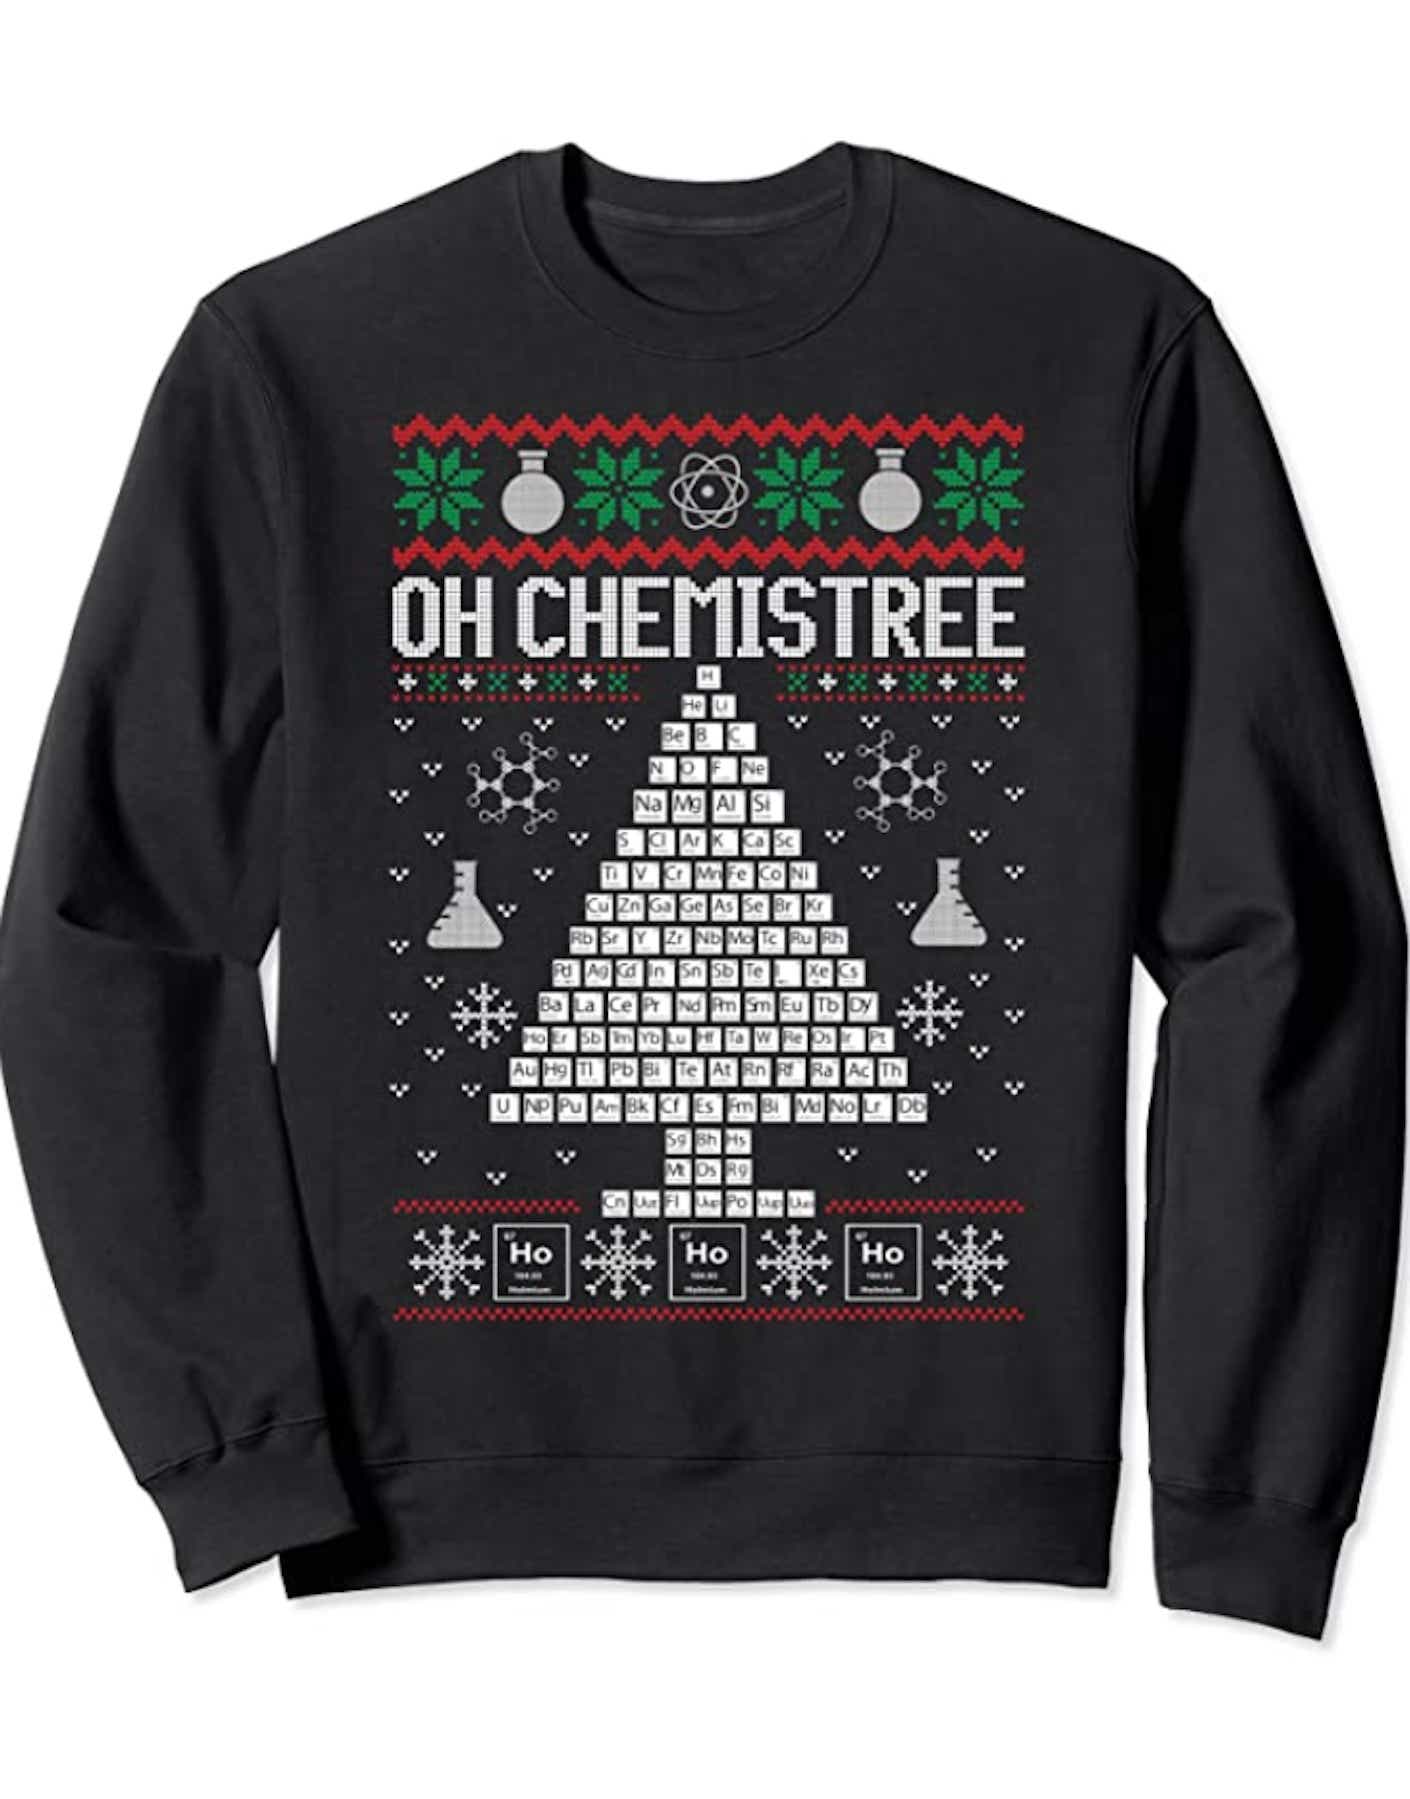 Funny ugly holiday sweater for science enthusiasts